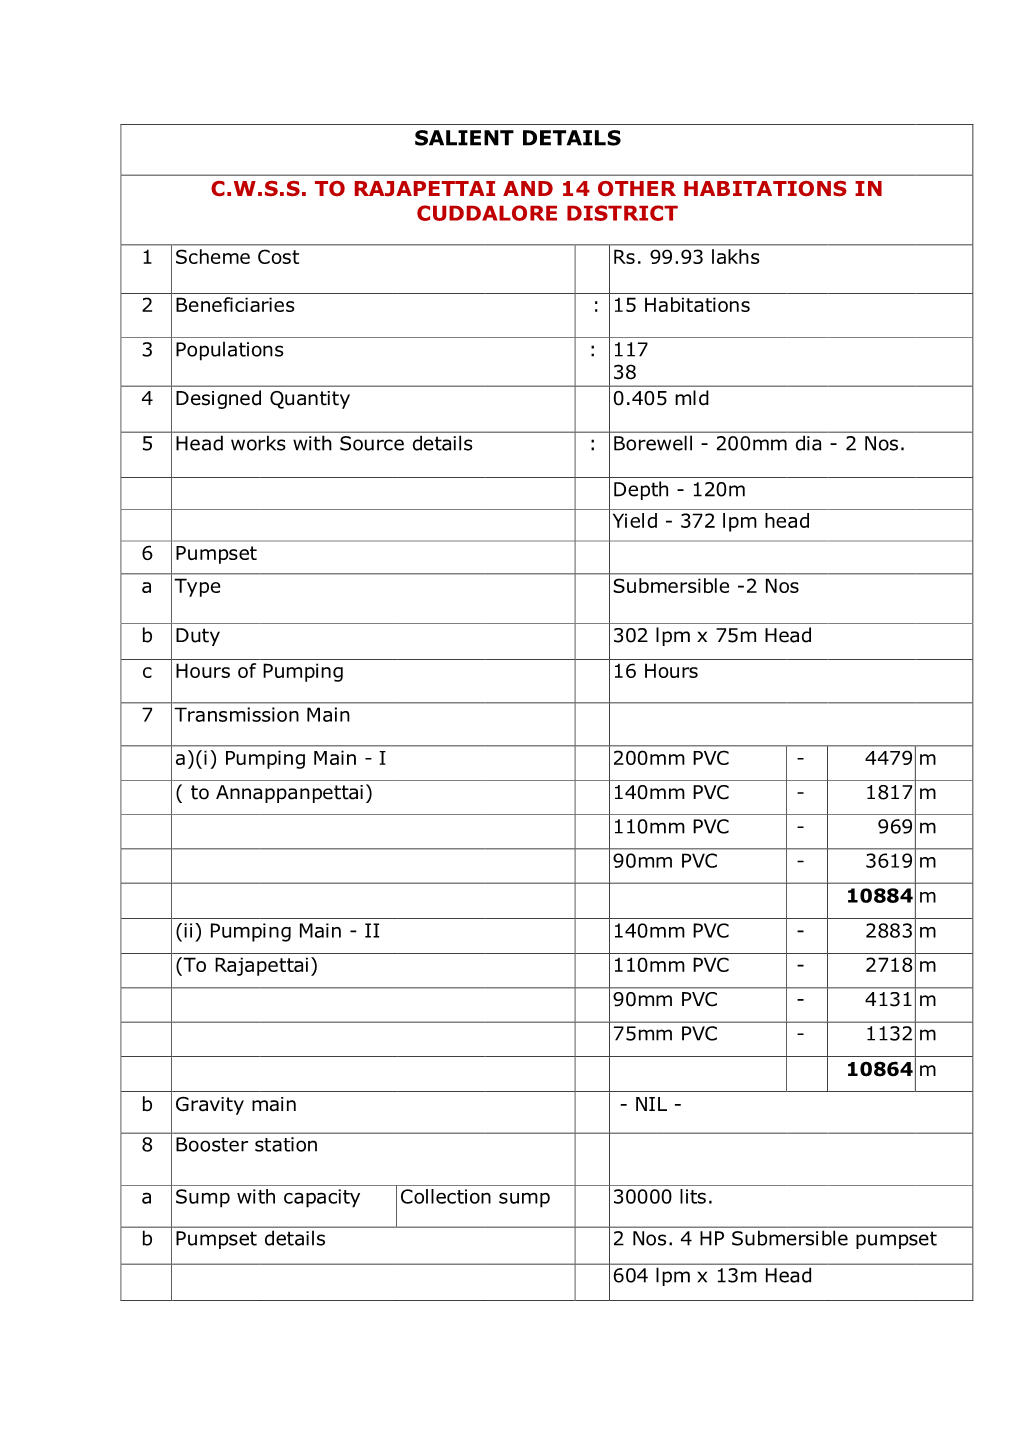 Salient Details C.W.S.S. to Rajapettai and 14 Other Habitations in Cuddalore District